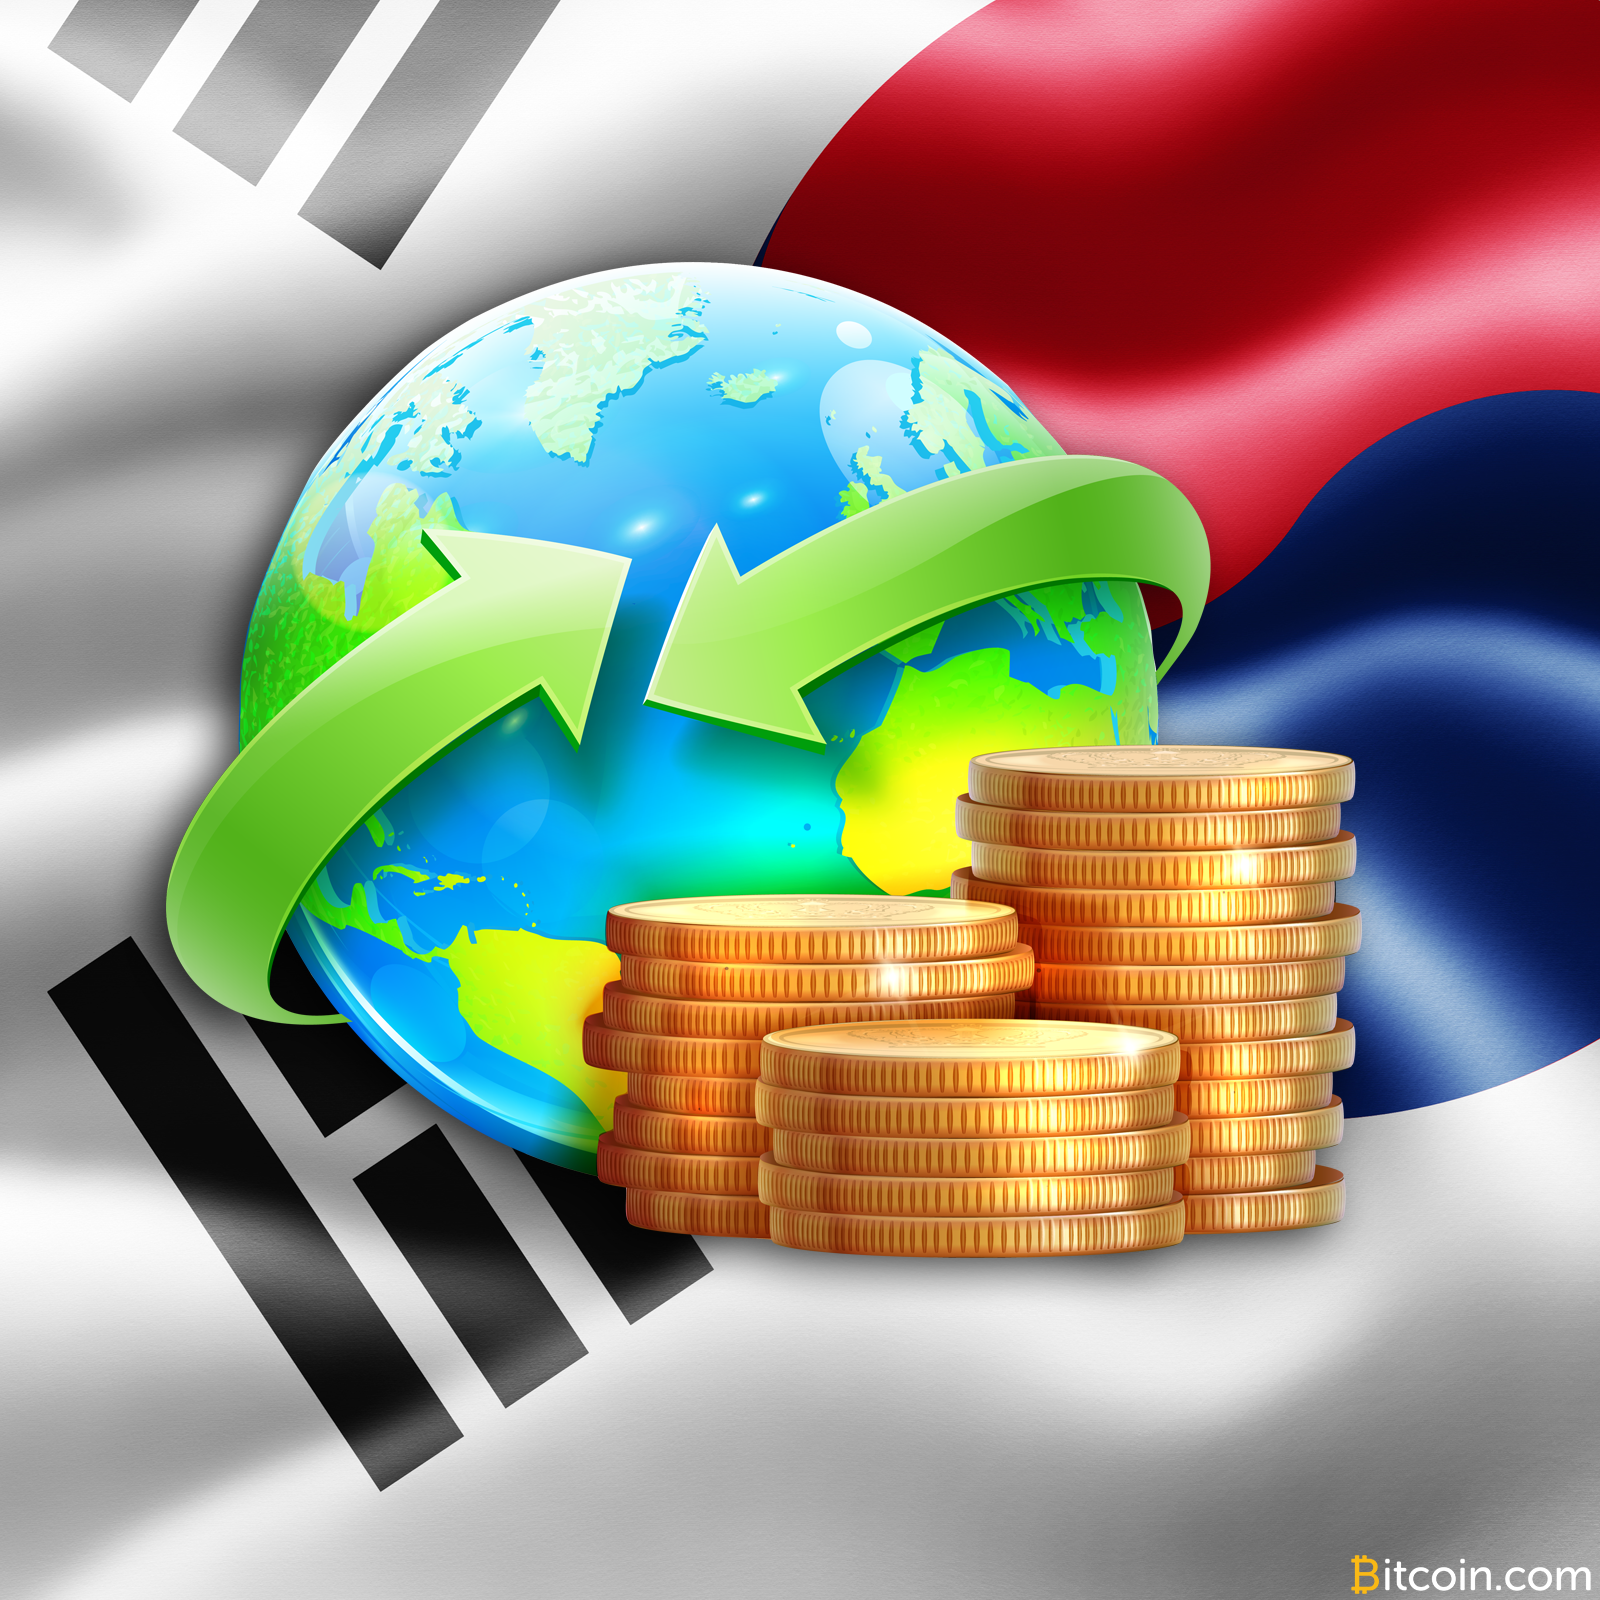 Large Korean Conglomerate Gets Into Bitcoin Remittances Post Legalization